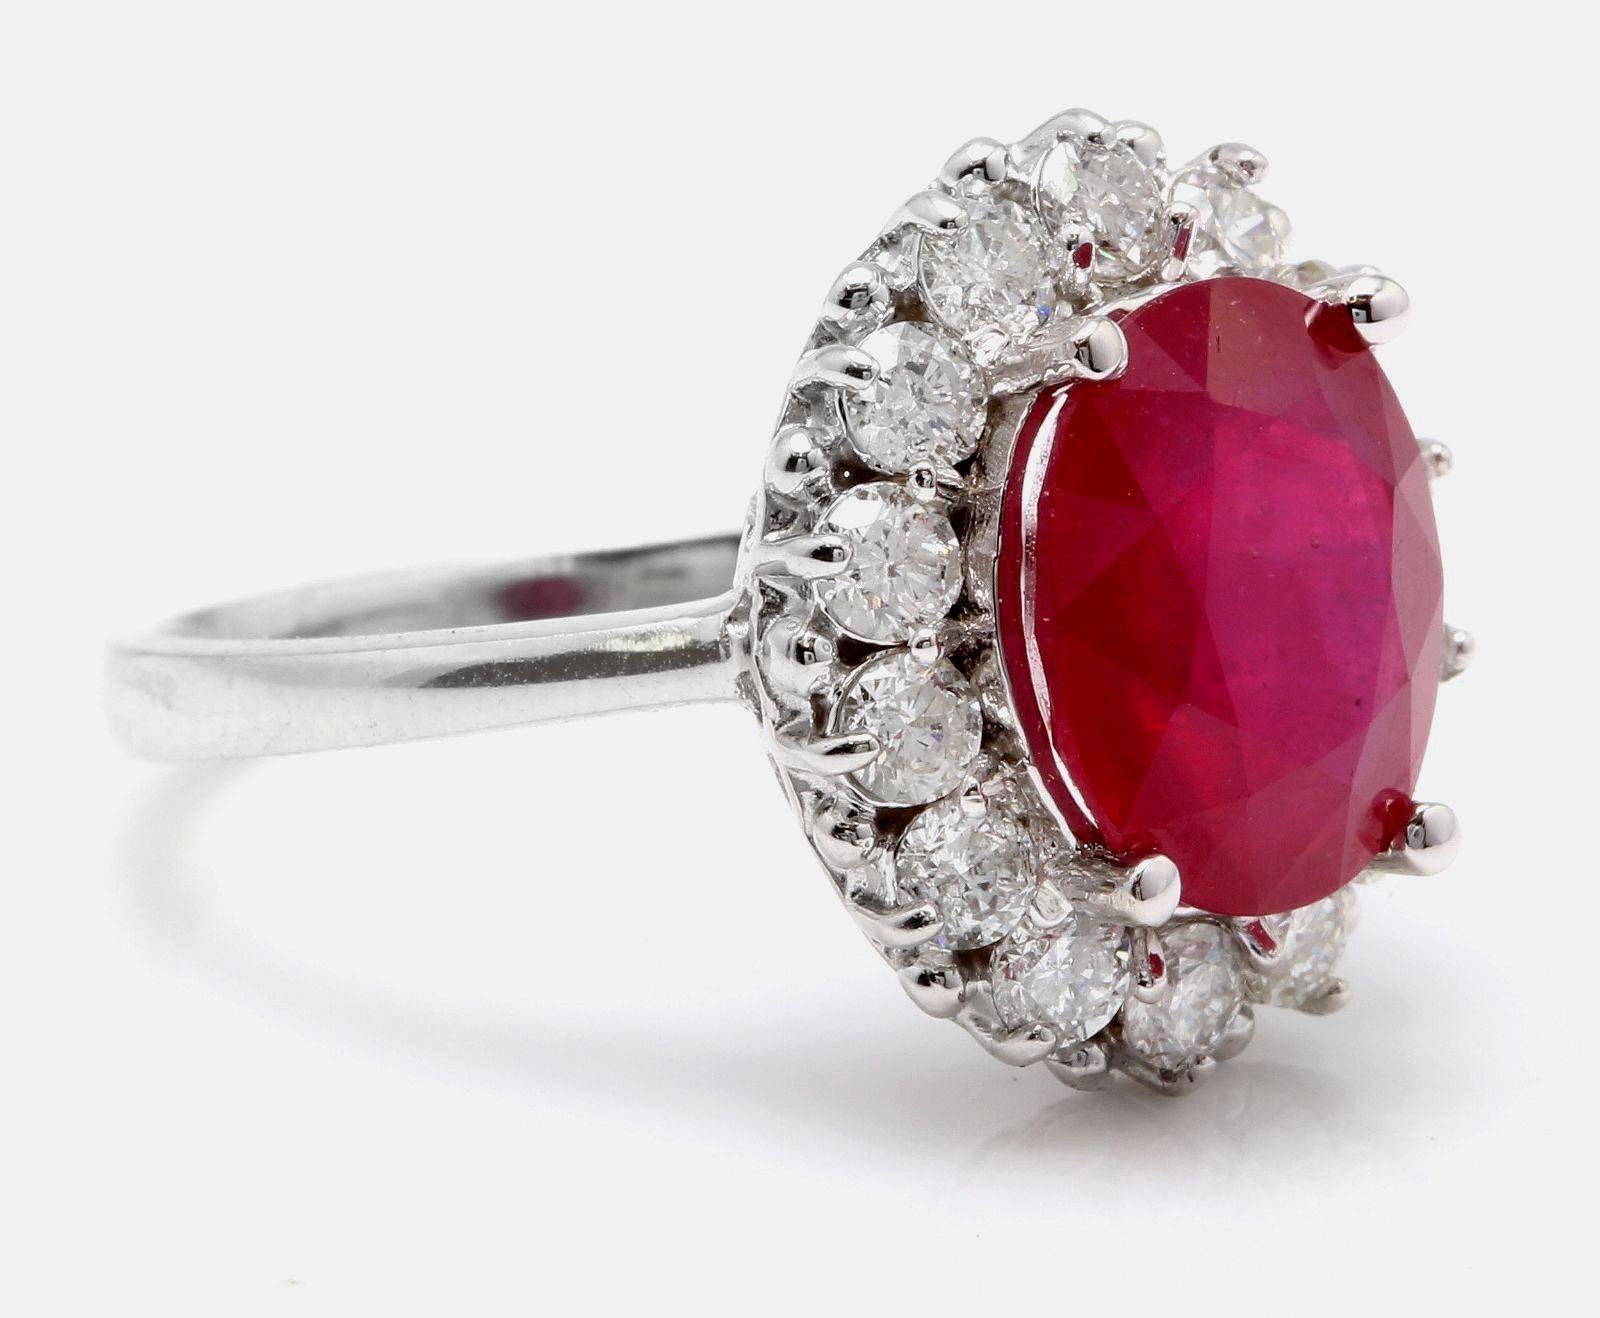 6.15 Carats Impressive Natural Red Ruby and Diamond 14K White Gold Ring

Total Red Ruby Weight is: Approx. 5.15 Carats

Ruby Treatment: Lead Glass Filling

Ruby Measures: Approx. 11.00 x 9.00mm

Natural Round Diamonds Weight: Approx. 1.00 Carat